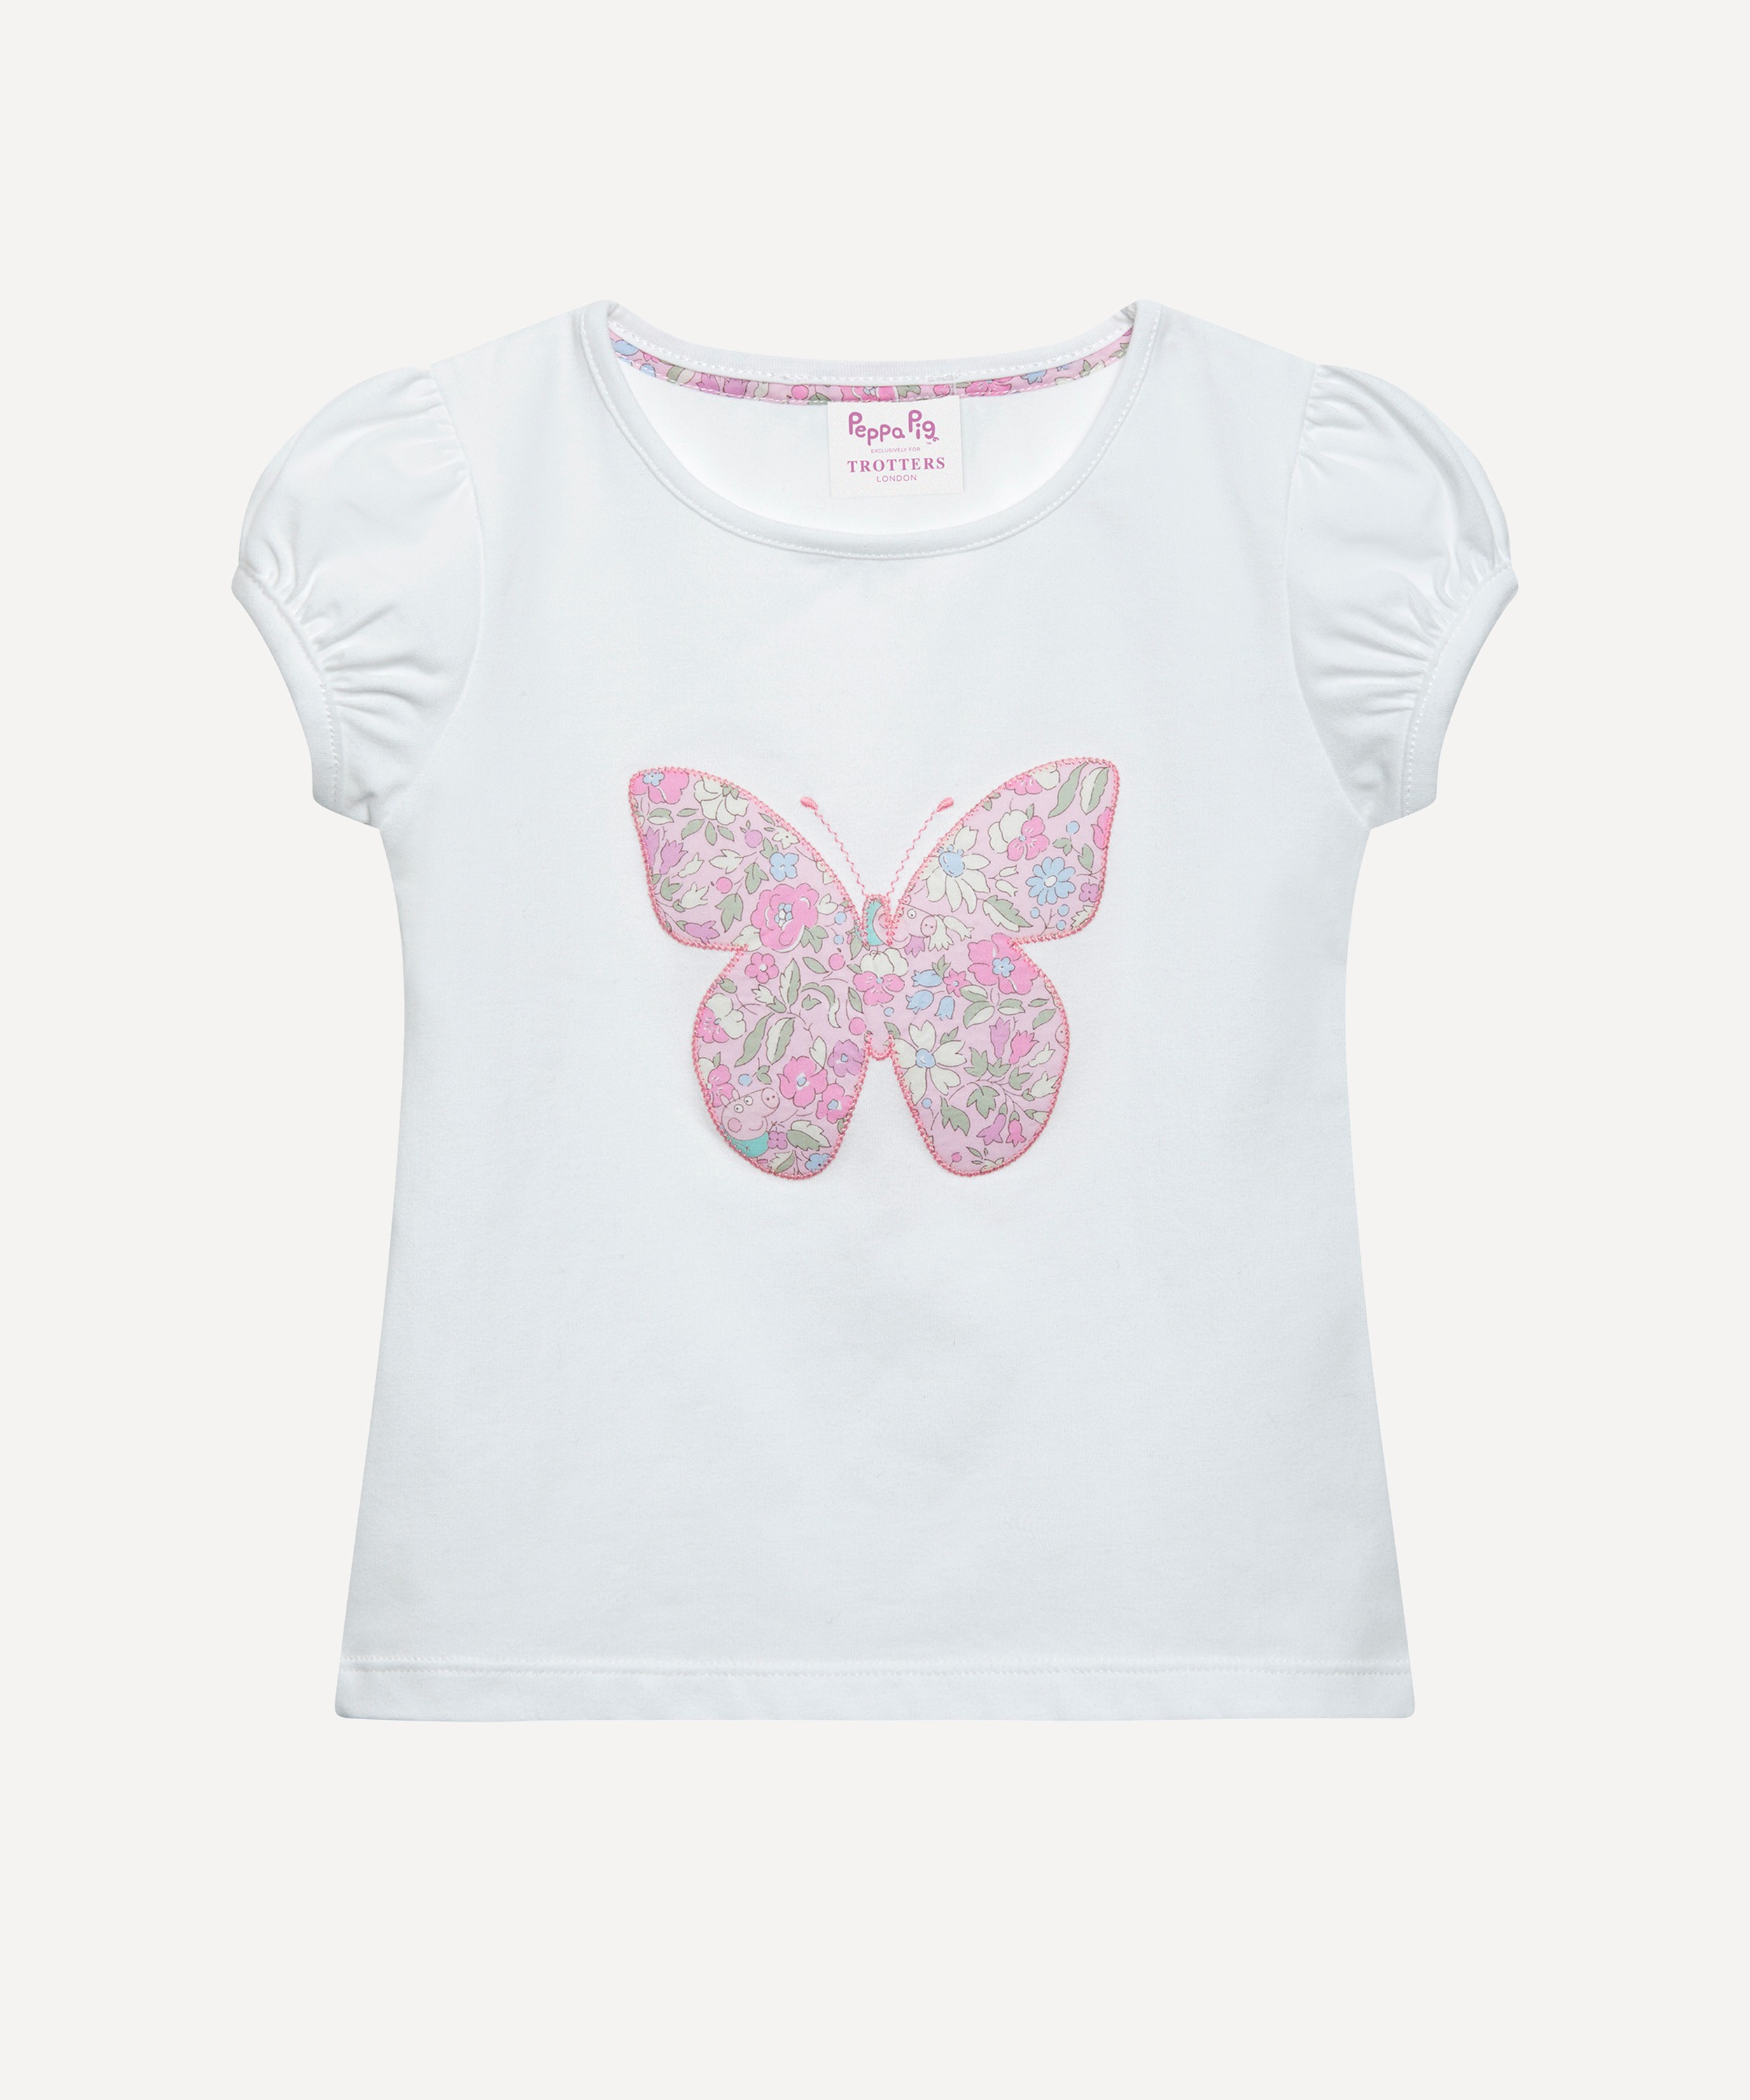 Trotters - x Peppa Pig Butterfly Jersey Top 1-7 Years